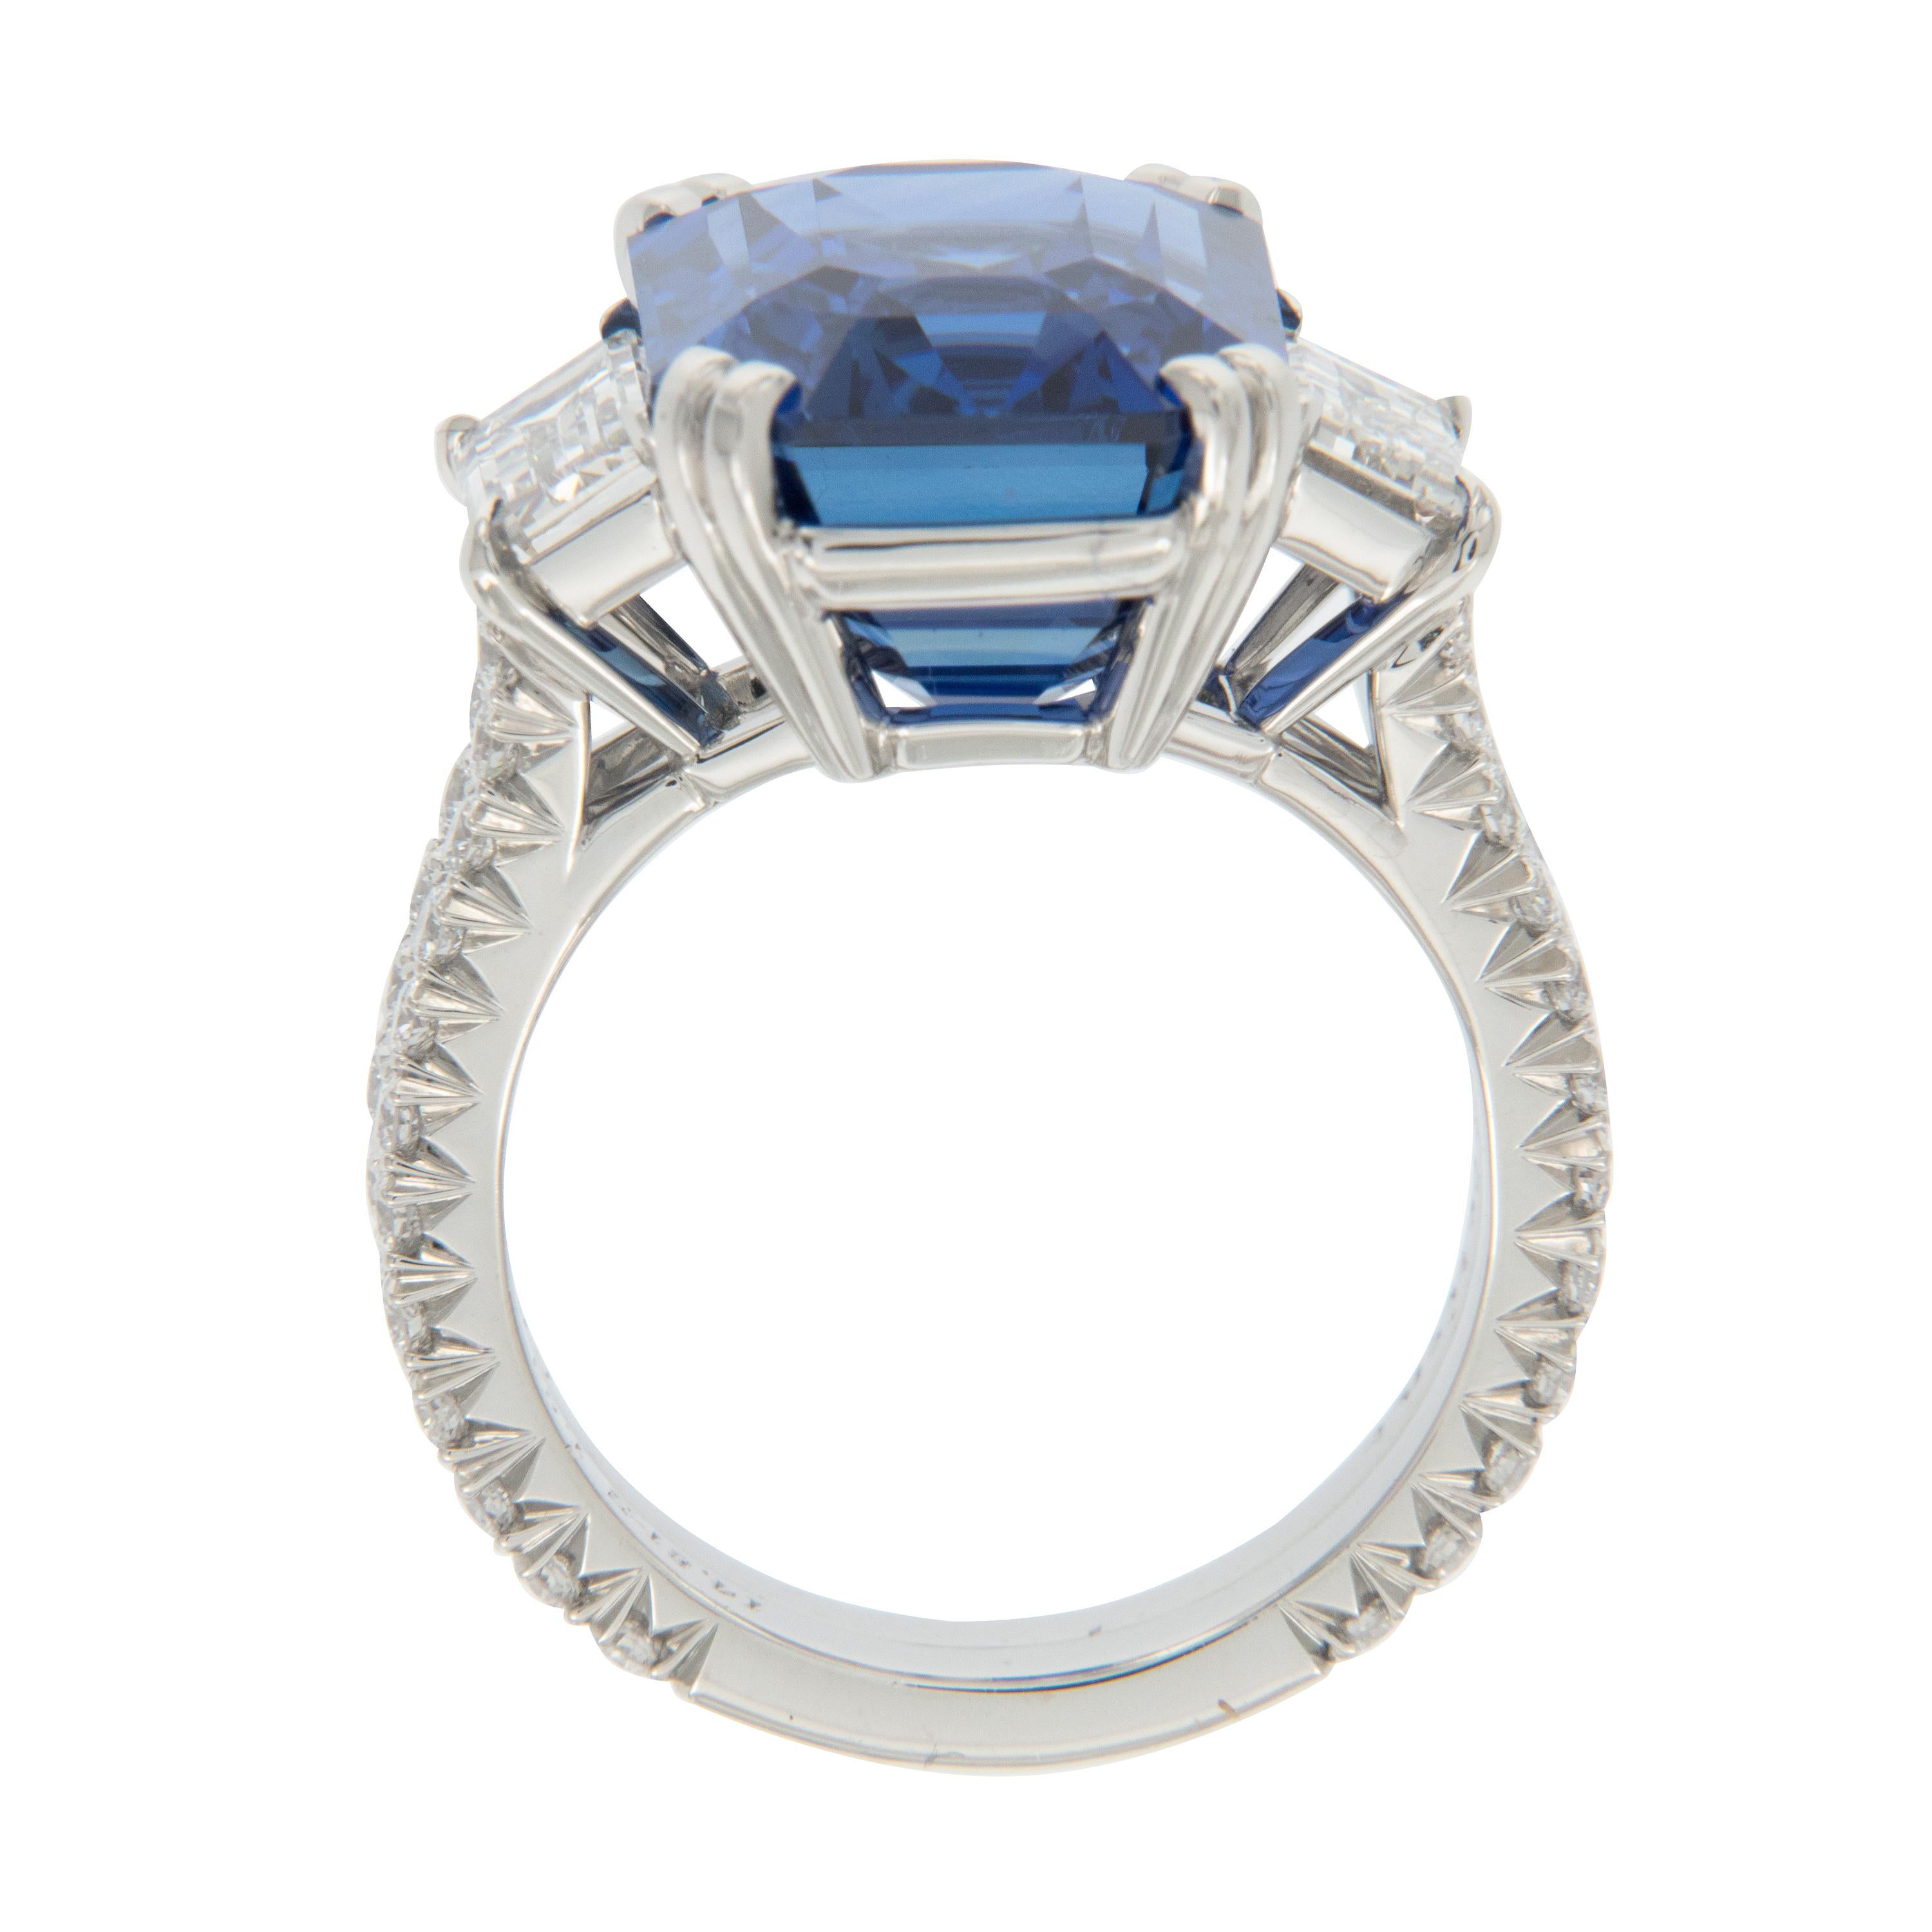 Contemporary Platinum 14.81 Ct Natural Sapphire and 1.54 Ct Diamond Ring with GRS & GIA Certs